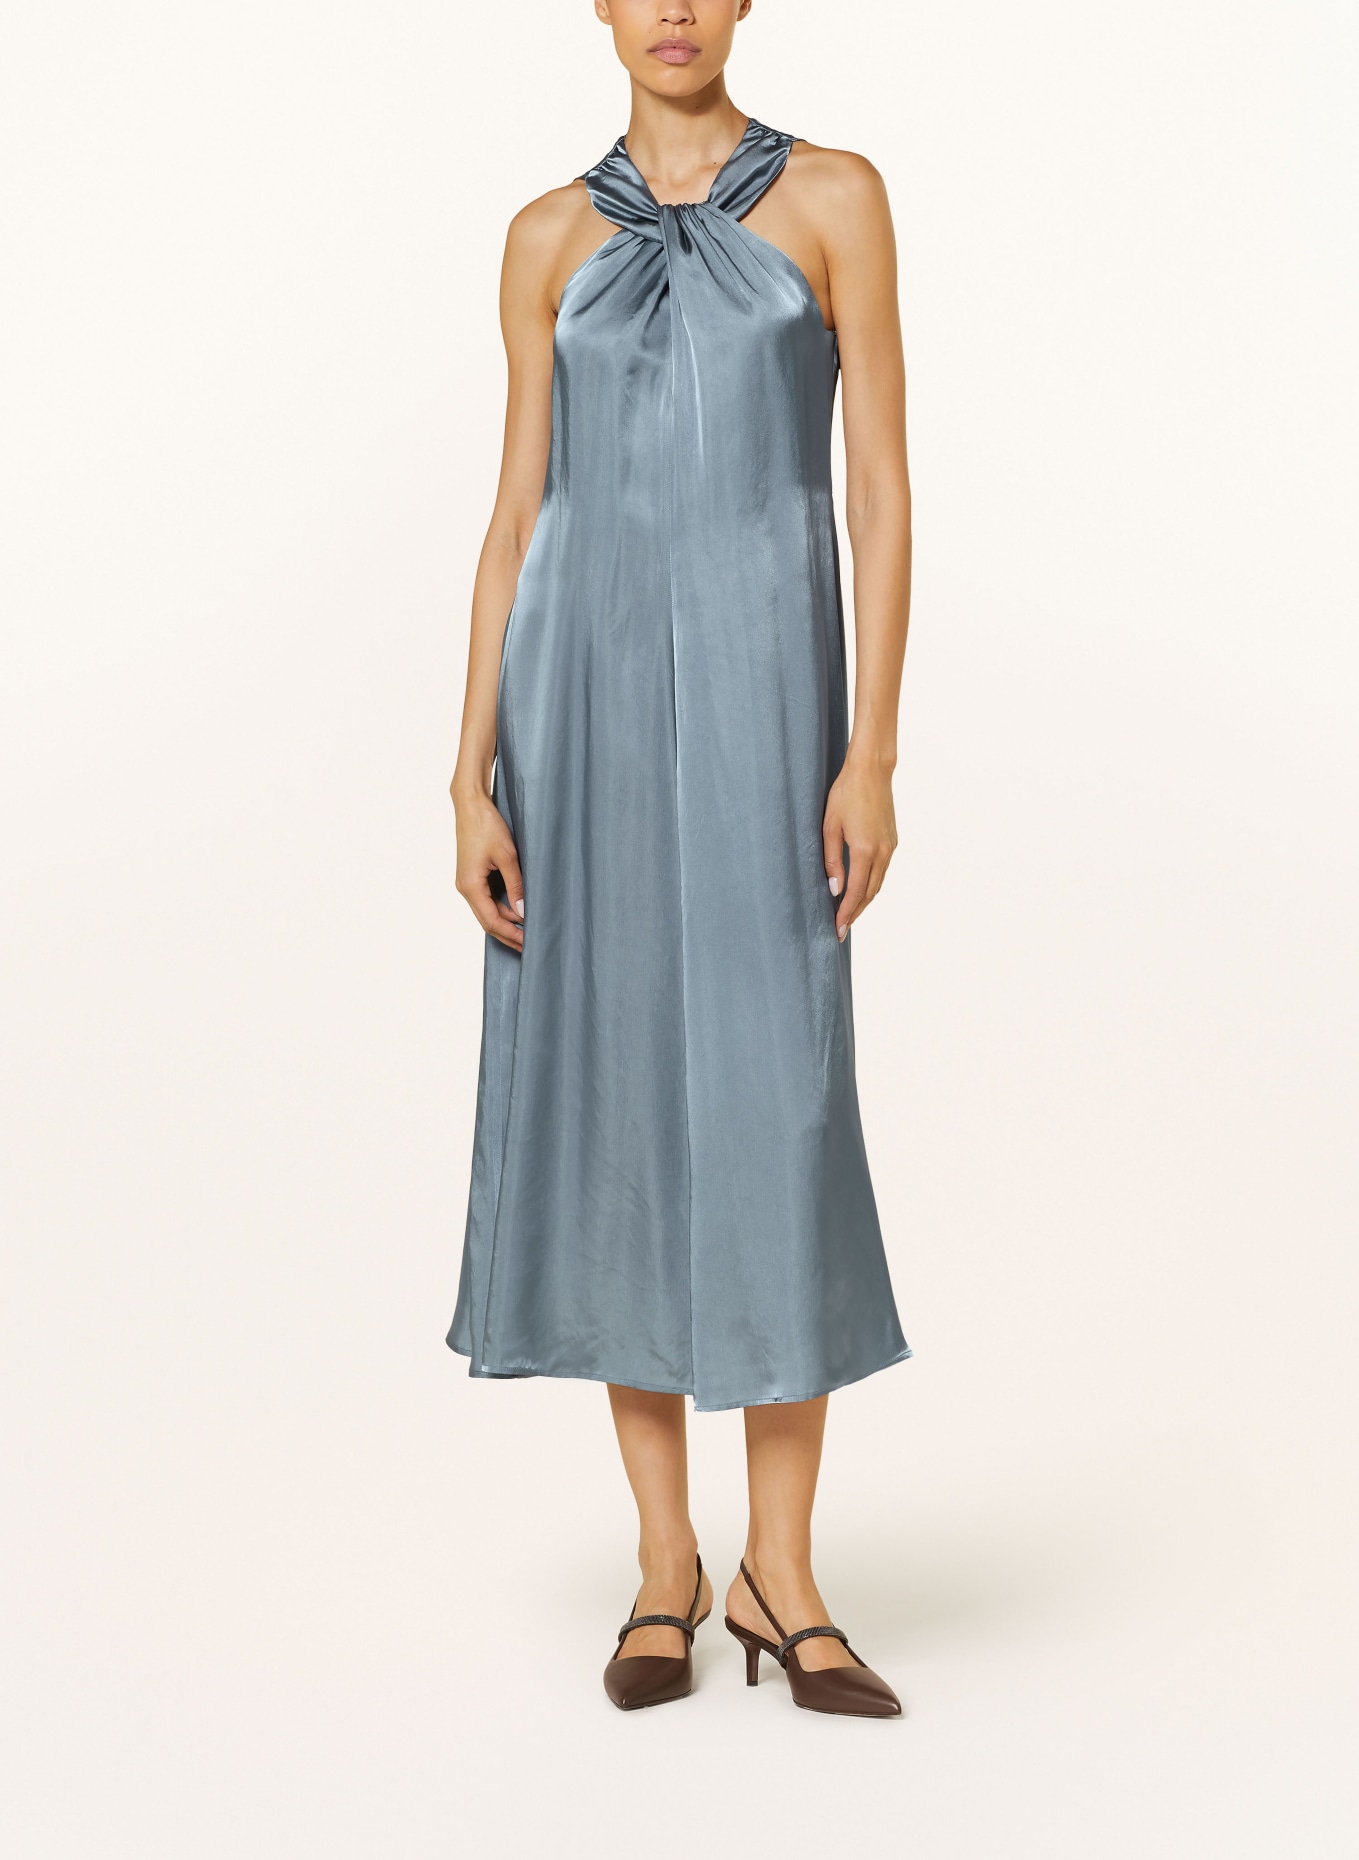 LUISA CERANO Cocktail dress made of satin, Color: BLUE GRAY (Image 2)